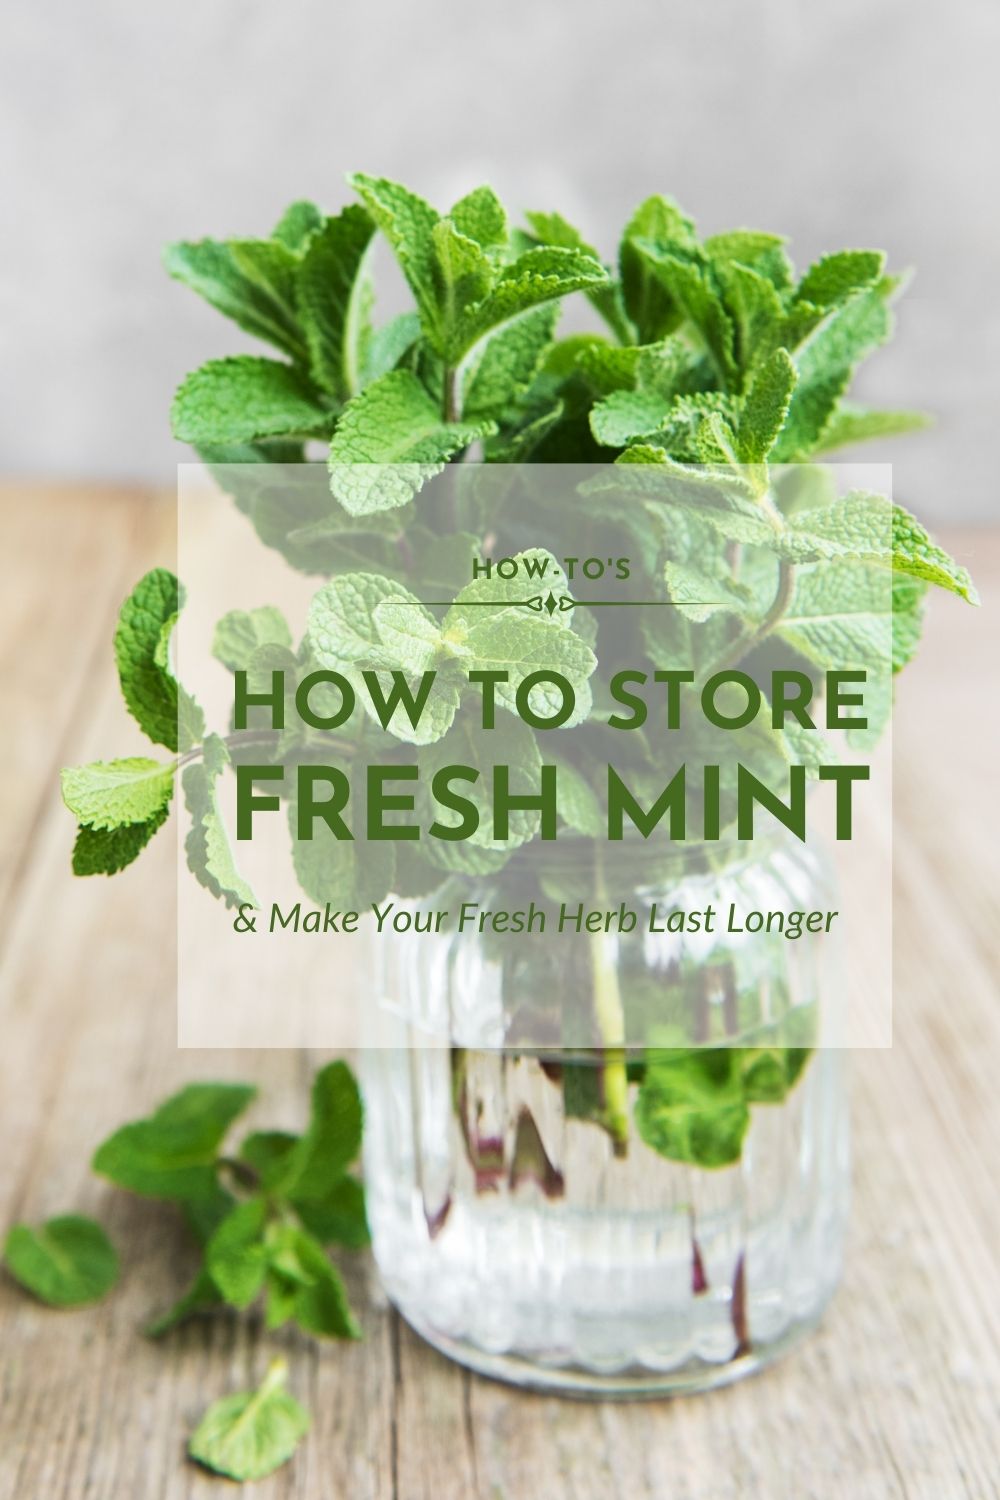 How to Store Fresh Mint (And Make Your Fresh Herbs Last Longer)